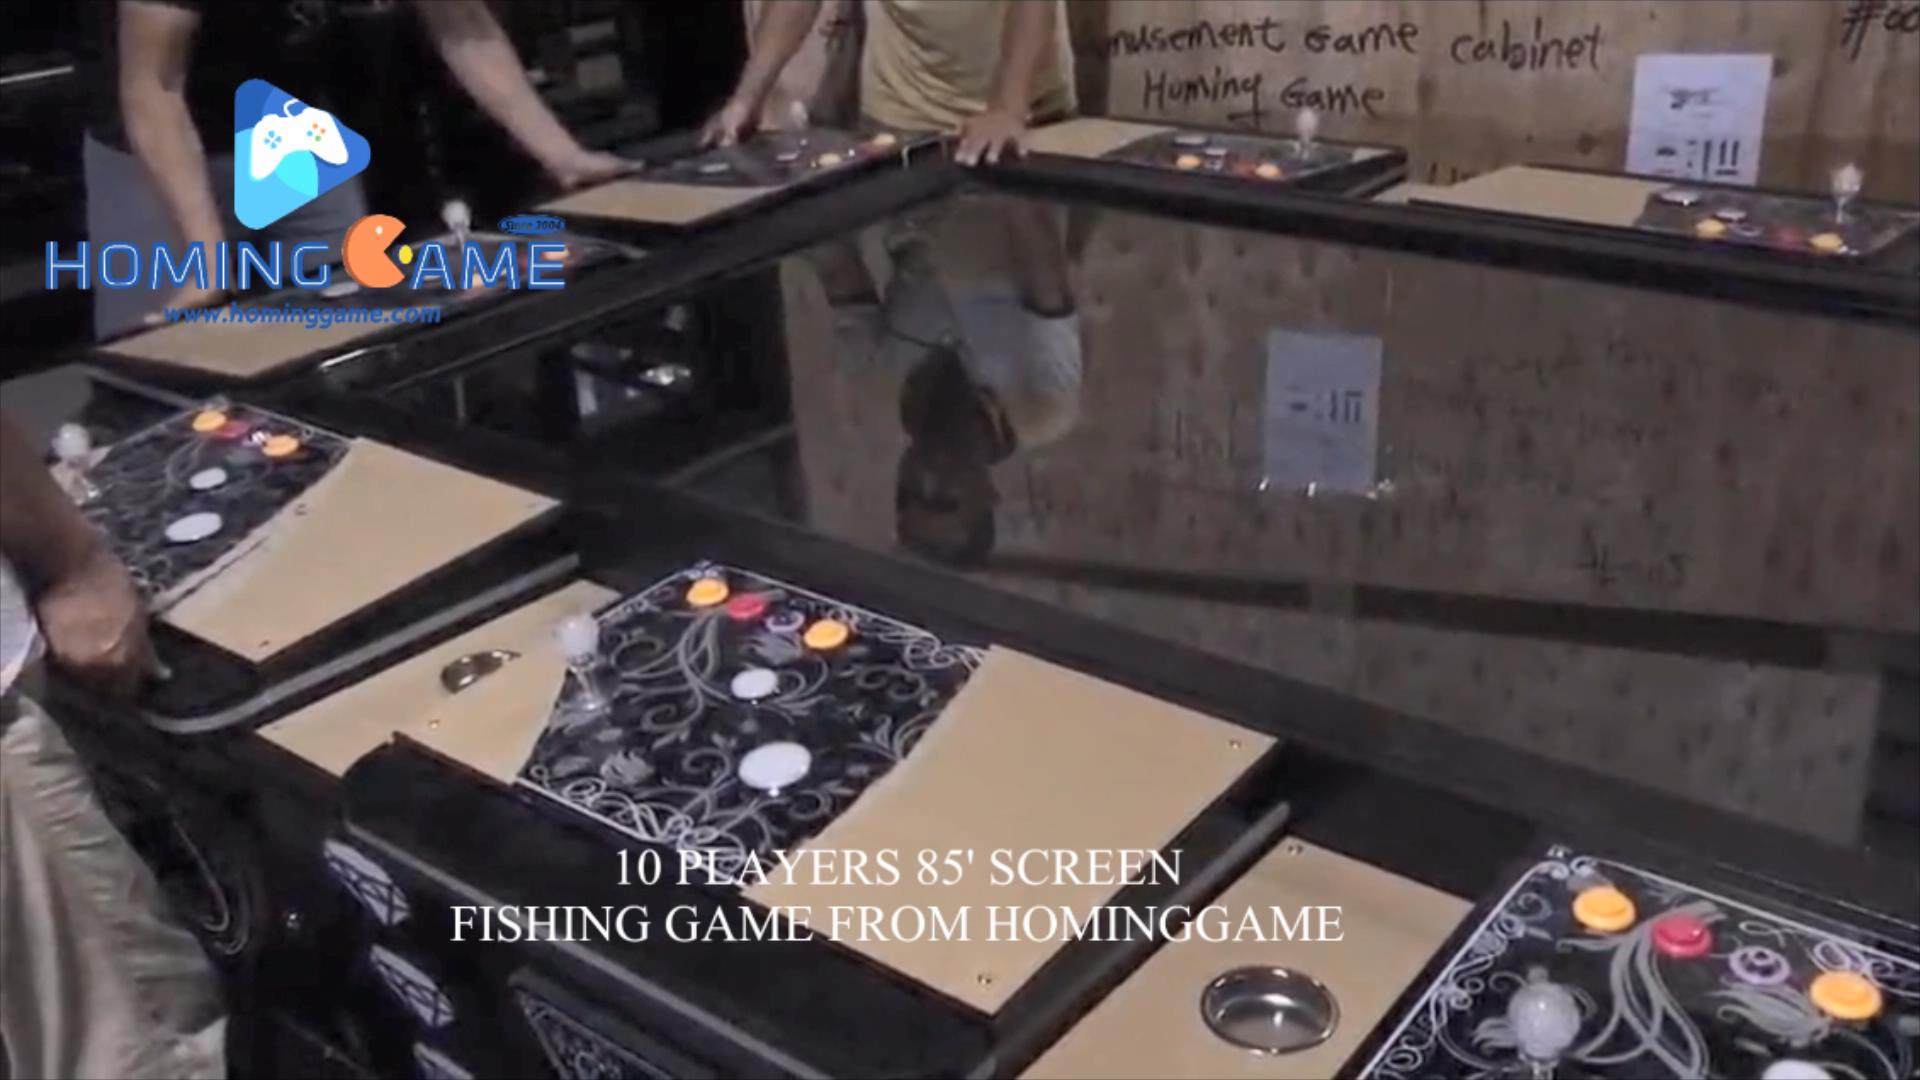 how to play fishing game,fishing game skills,fishing game motherboard,fishng game decoder box,USA best fishing table game machine supplier and manufacturer by HomingGame Specialize in manufacture fishing Game(Order Call Whatsapp:+8618688409495),fishing game,fishing table,fishing table game machine,fishing game machine,fishing arcade game machine,fish hunter fishing game machine,upright table fishing game machine,standup fishing game machine,ocean king 3 fishing game machine,capatian america fishing game machine,tiger stirke fishing game machine,godzilla fishing game machine,rampage fishing game machine,dragon legend fishing game machine,ocean king,igs fishing game machine,electrical fishing game machine,usa fishing game machine,ocean king 2 fishing gam emachine,fishing game machine supplier,fishing game machine manufacturer,gaming machine,gambling machine,game machine,arcade game machine,coin operated game machine,indoor game machine,electrical game machine,amusement park game equipment,amusement machine,gaming,casino gaming machine,usa fishing game machine supplier,USA fishing table game machine manufacturer,fishing game cheats,fishing game skills,how to paly the fishing game machine,fishing game decoding,fishing game decoder box,hominggame,www.gametube.hk,hominggame fishing game,entertainment game machine,family entertainment game machine,arcade game machine for sale